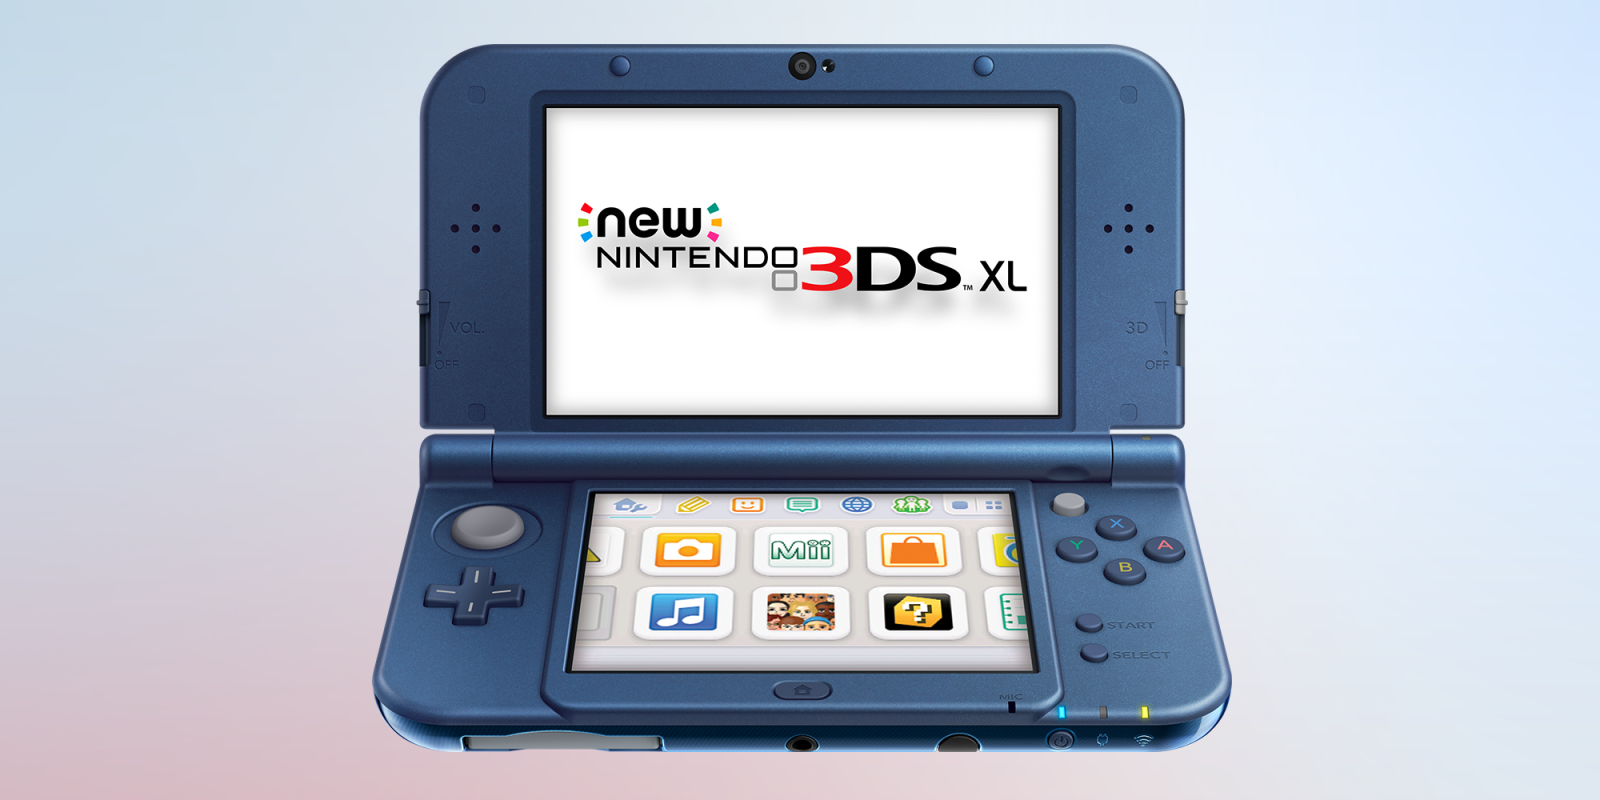 Why are prices of certain old Nintendo 3DSs skyrocketing in Japan? 